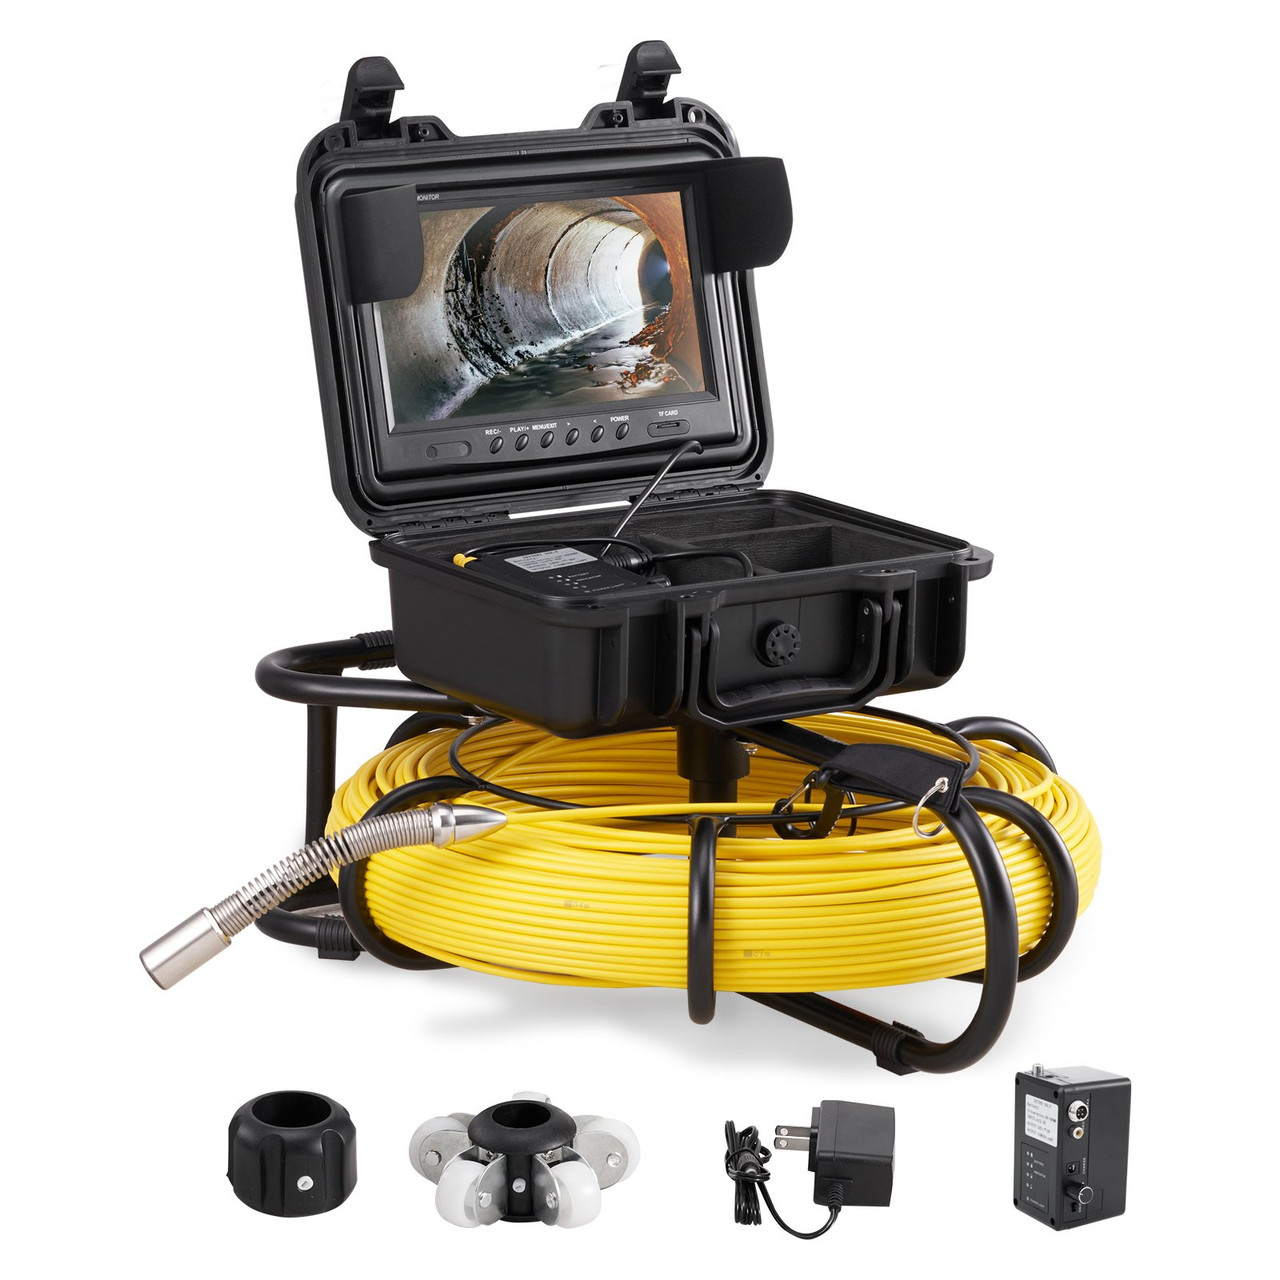 Sewer Camera Pipe Inspection Camera 9-inch 720p Screen Pipe Camera 393 ft